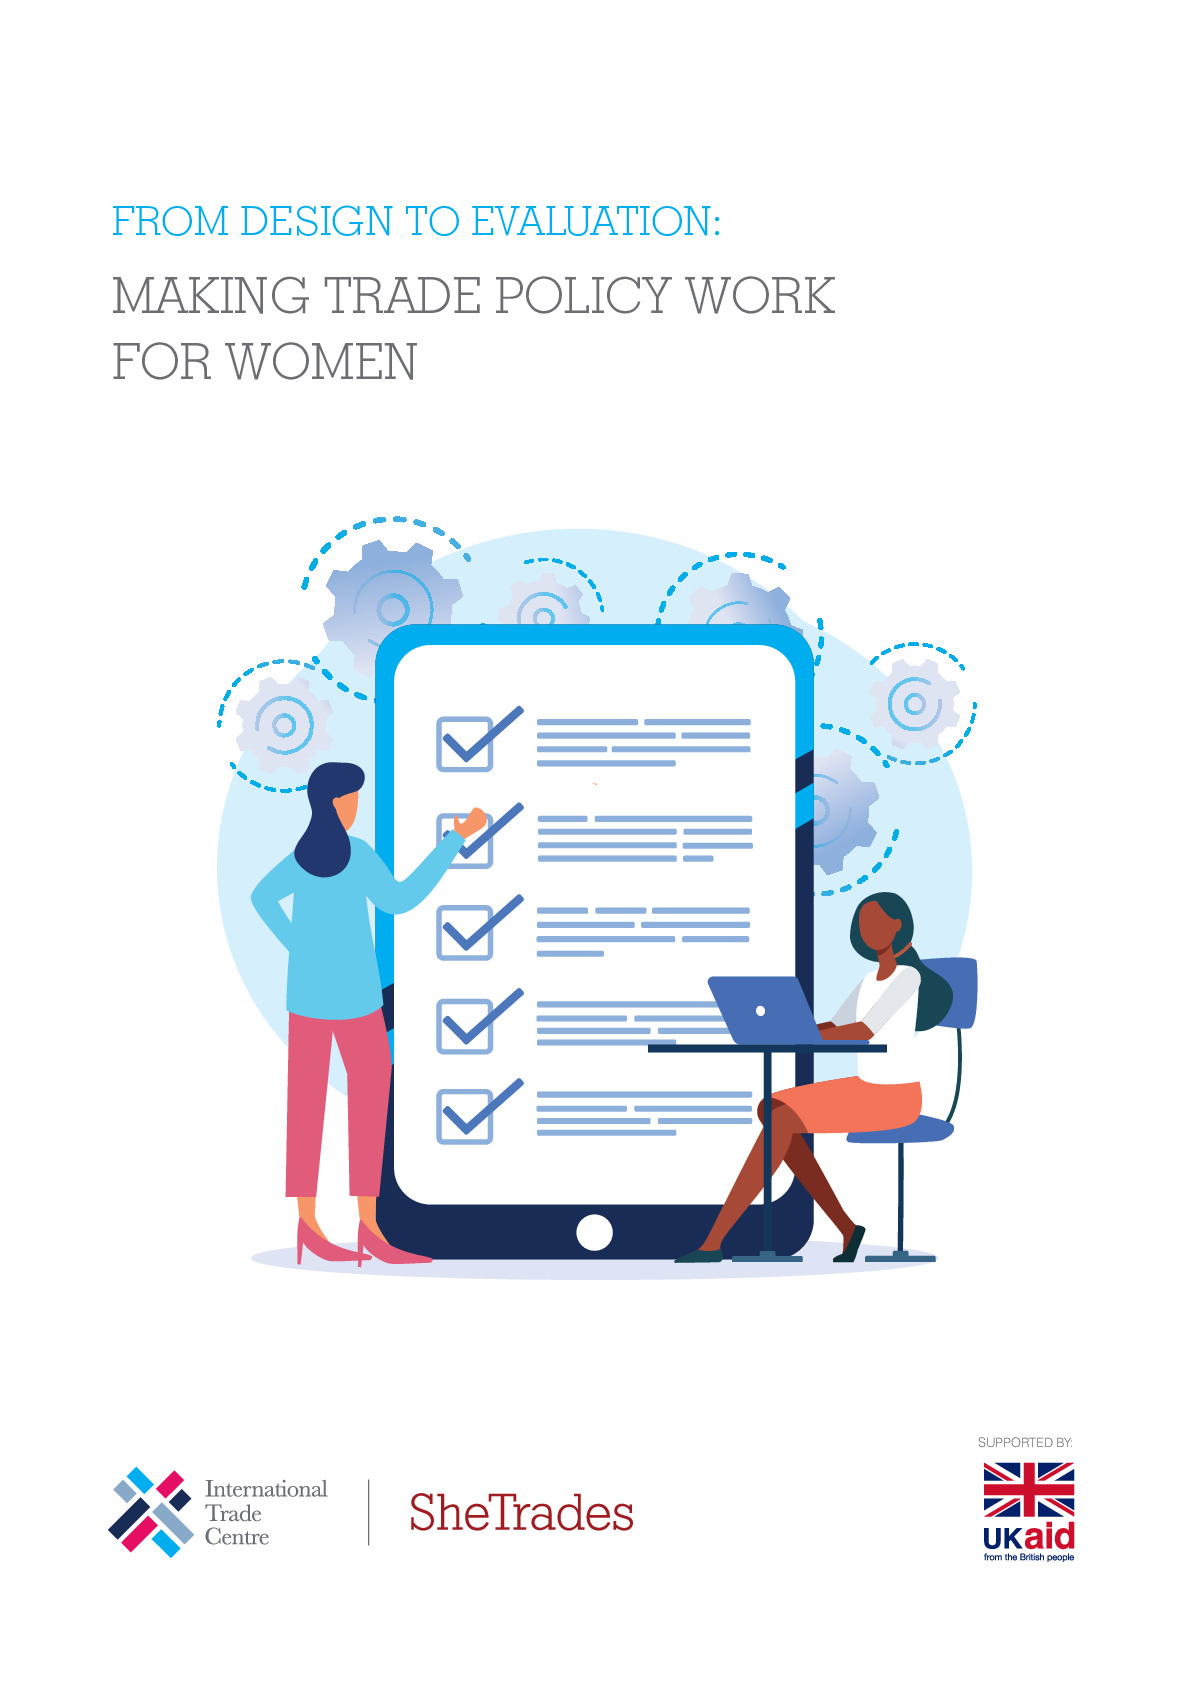 itc_making_trade_policy_work_for_women